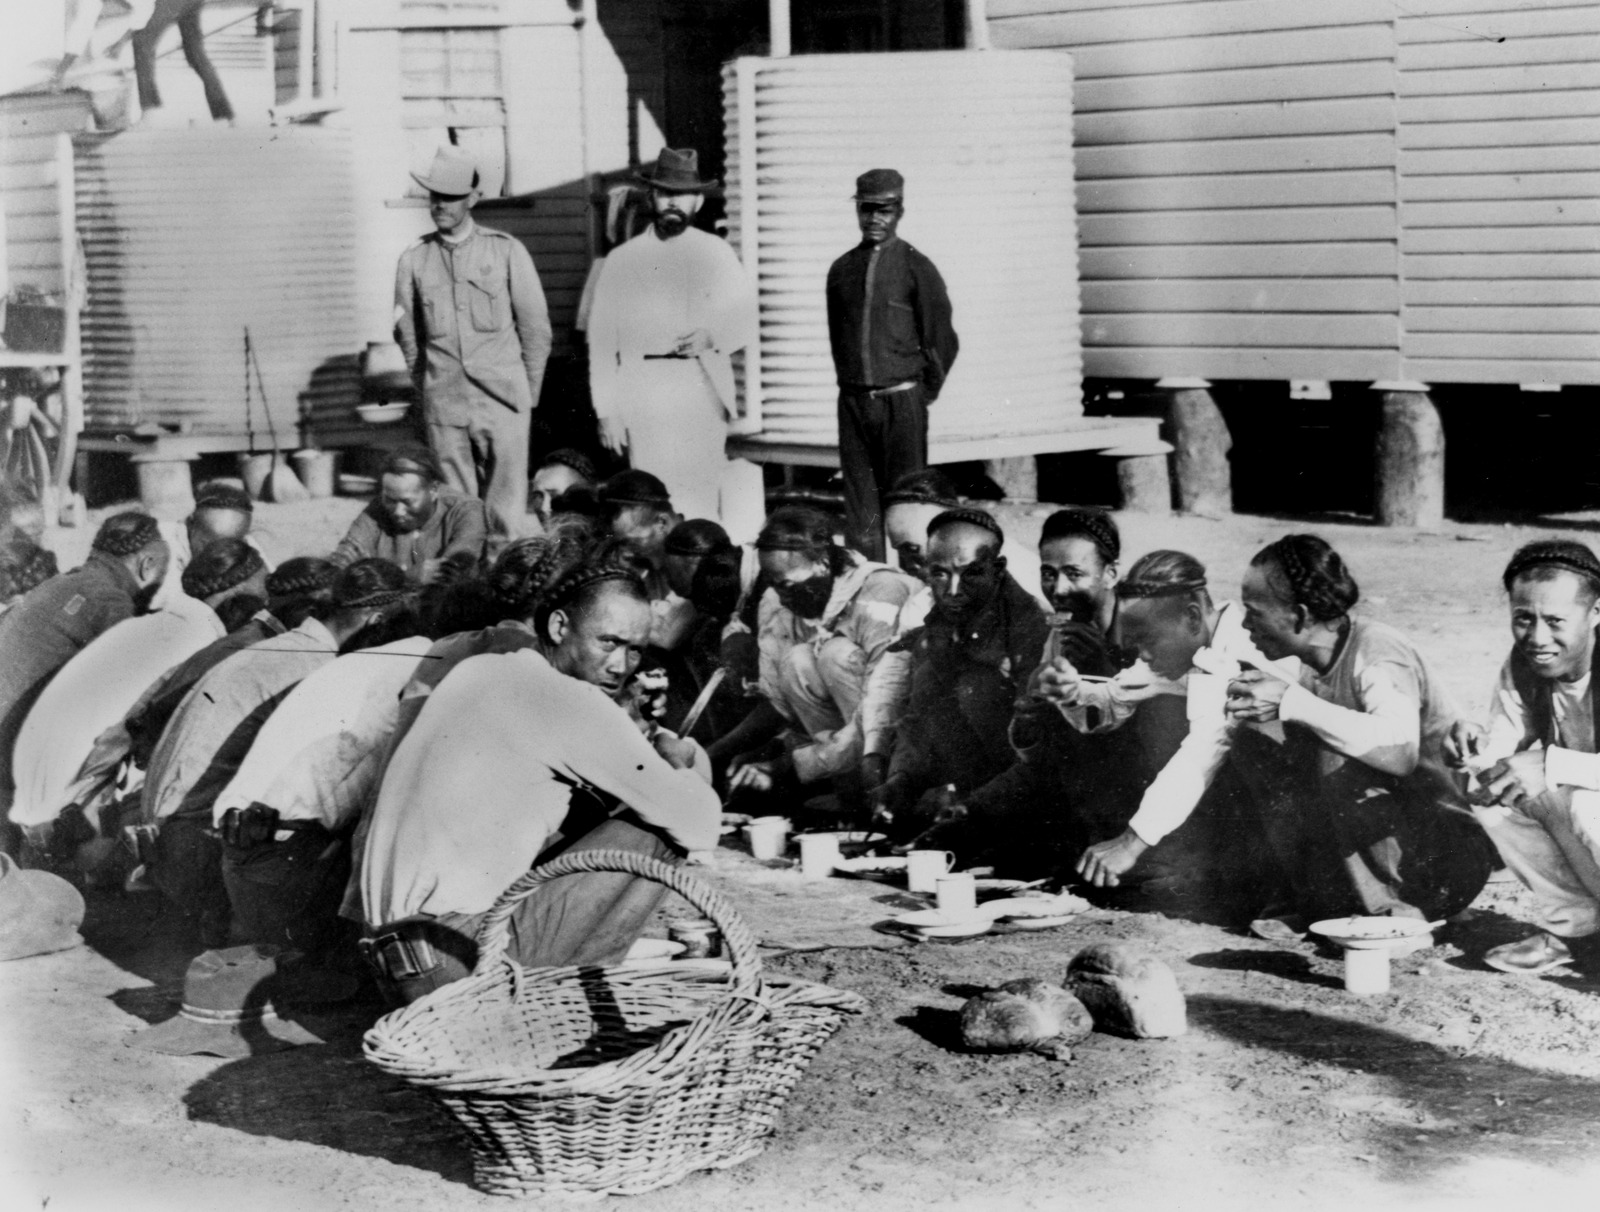 Chinese prisoners being fed under supervision outside in the Goal Yard, Burketown, Queensland, ca. October 1900.